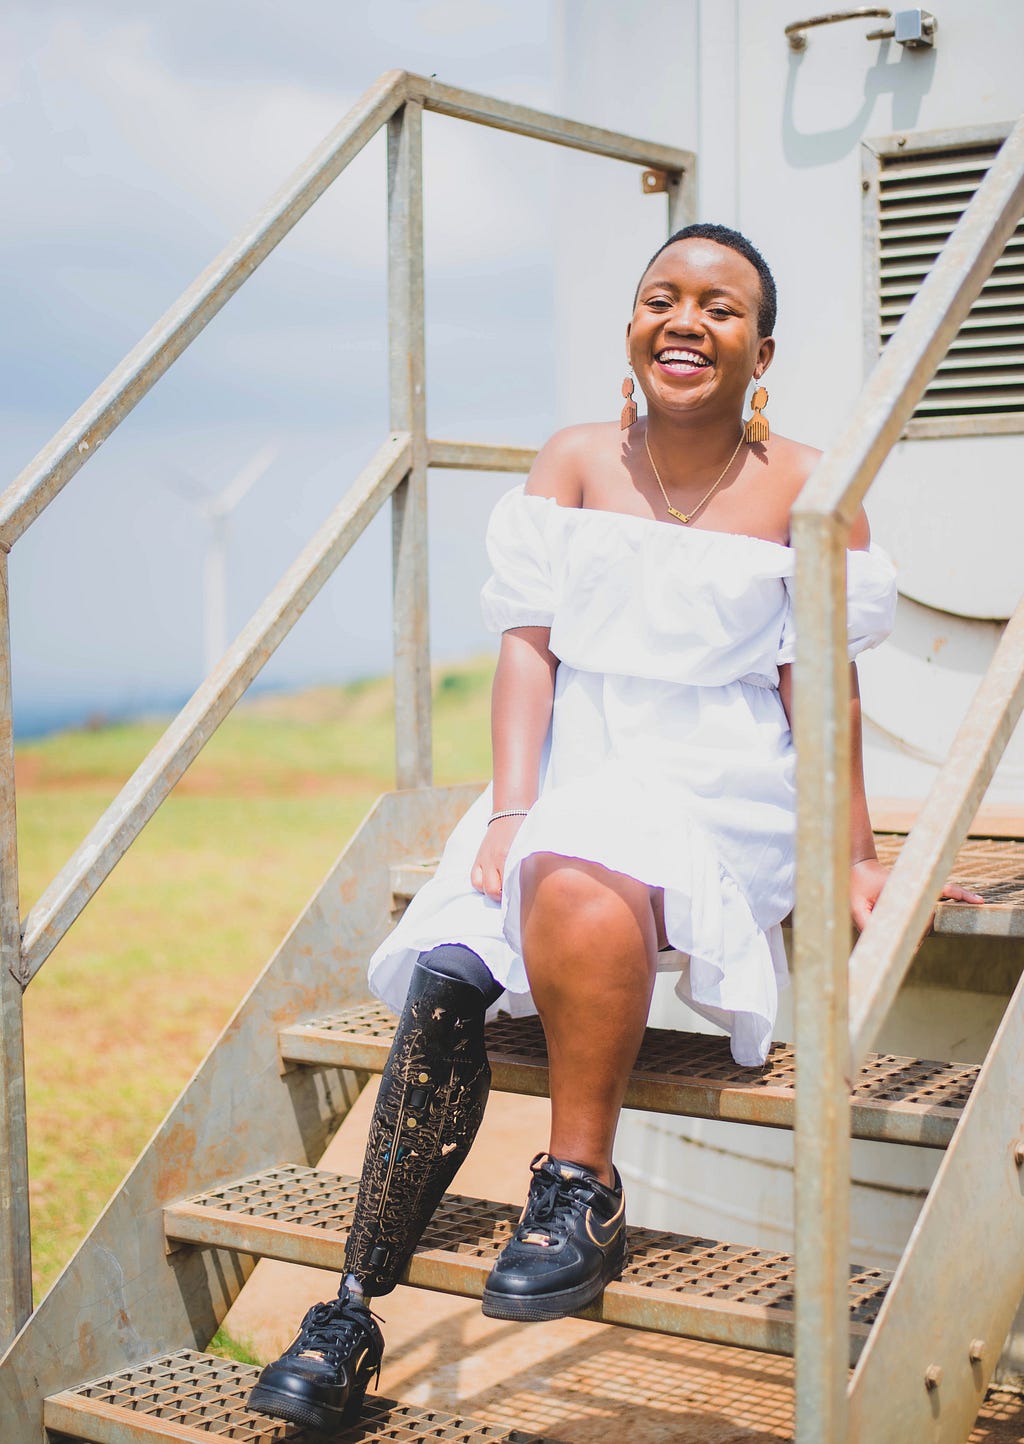 A picture of Elizabeth Mang’eni sitting on stairs, smiling. She is wearing a white dress and golden earrings.